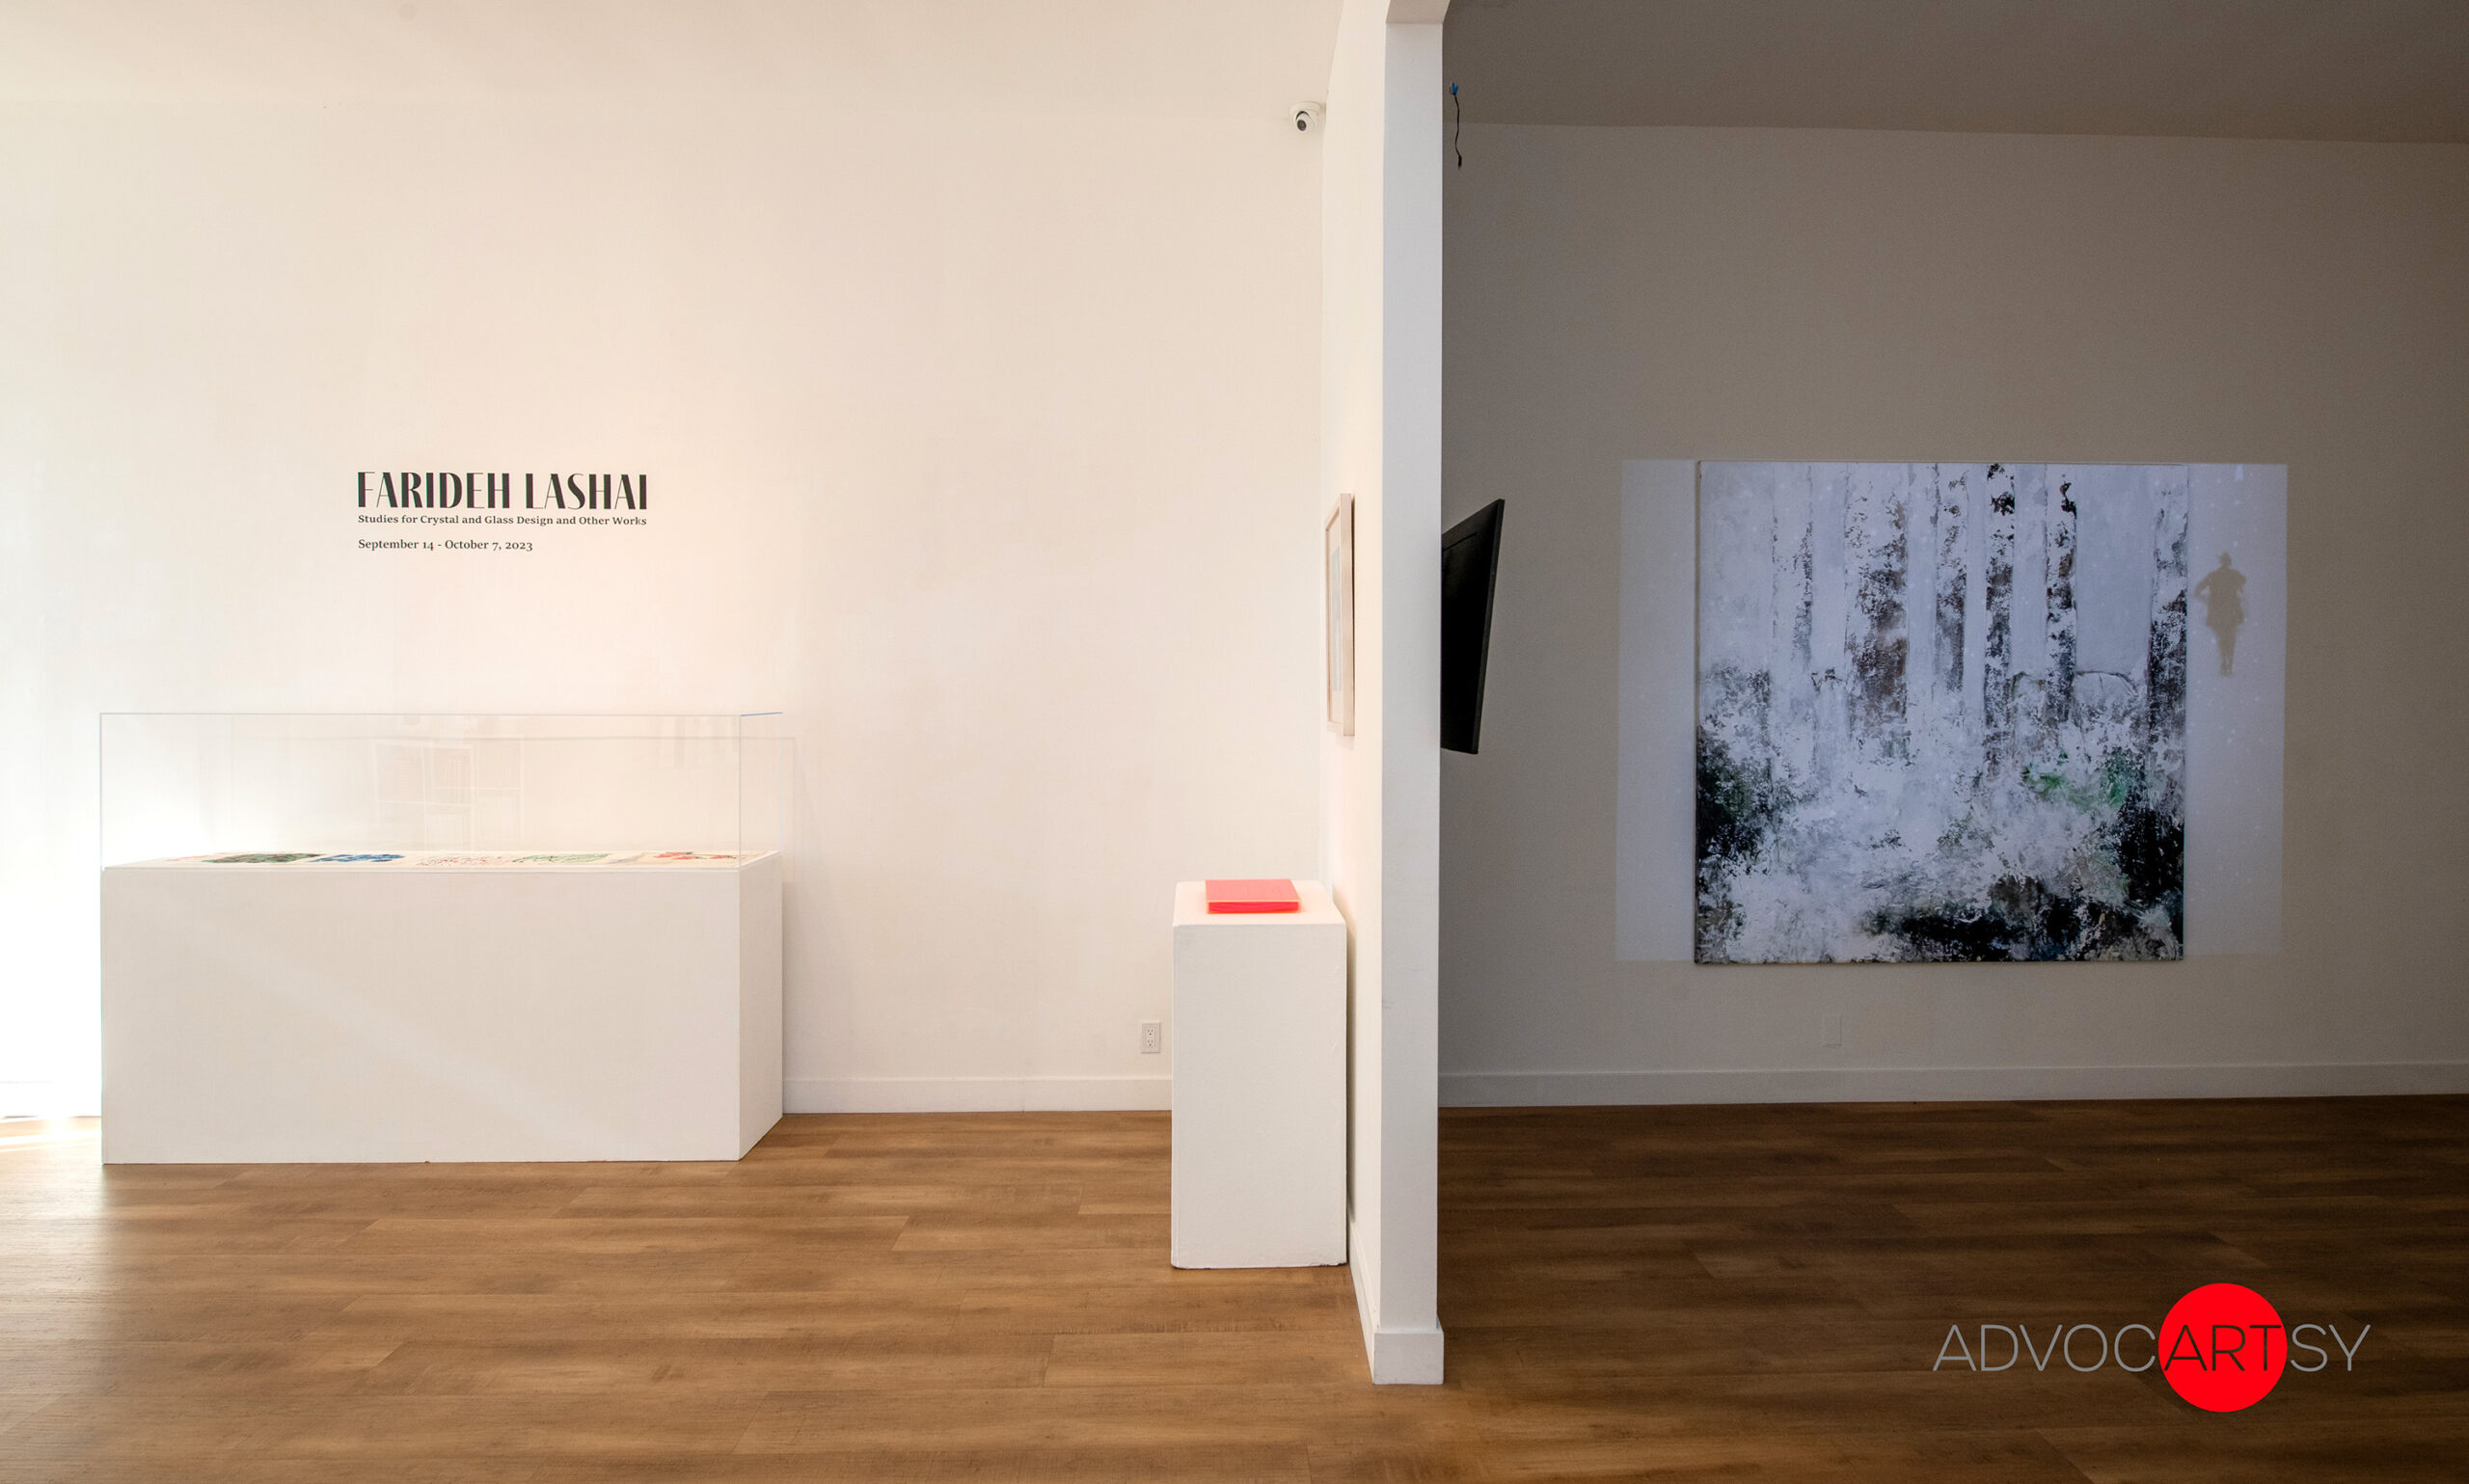 Two walls in ADVOCARTSY's West Hollywood gallery space; one reads "Farideh Lashai: Studies for Crystal and Glass Design and other works," and the other wall shows a large painting with an overlaying projected video.